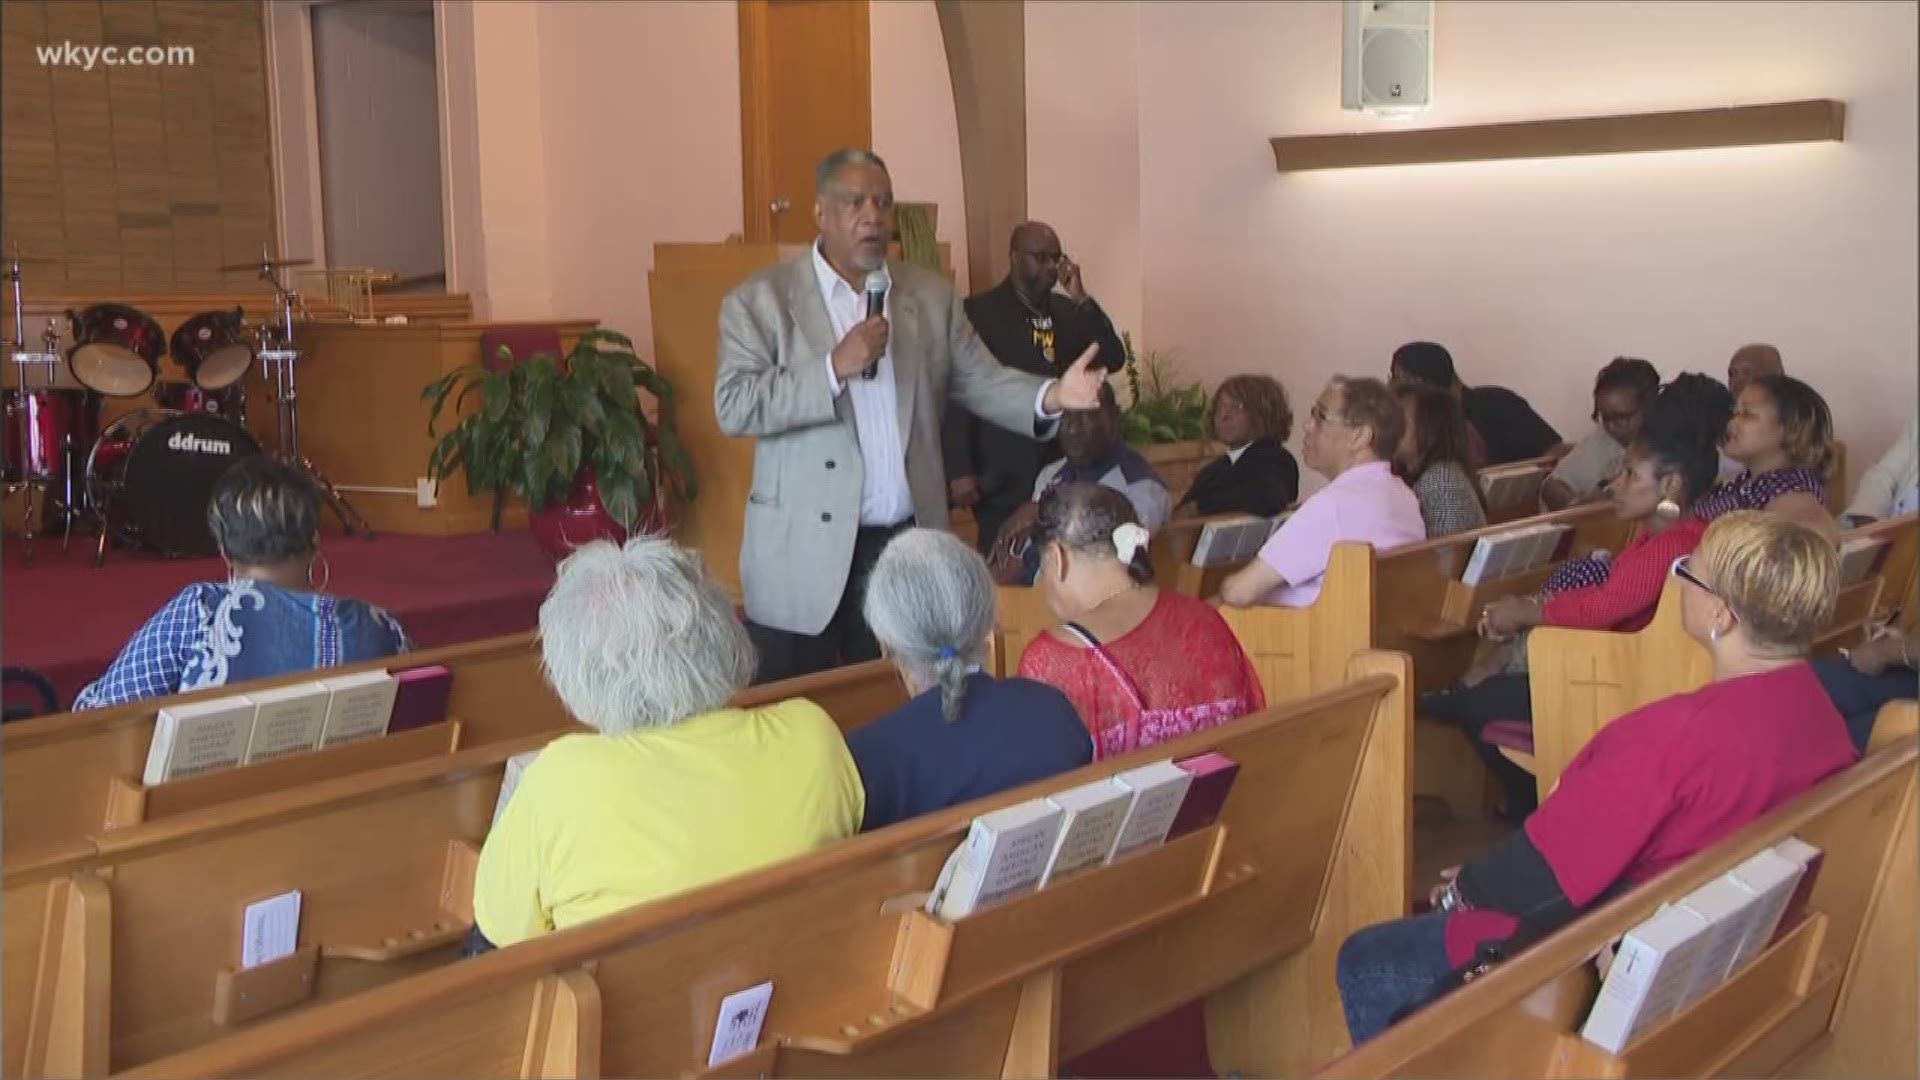 Ministers in Cleveland hold community conversation to address crime